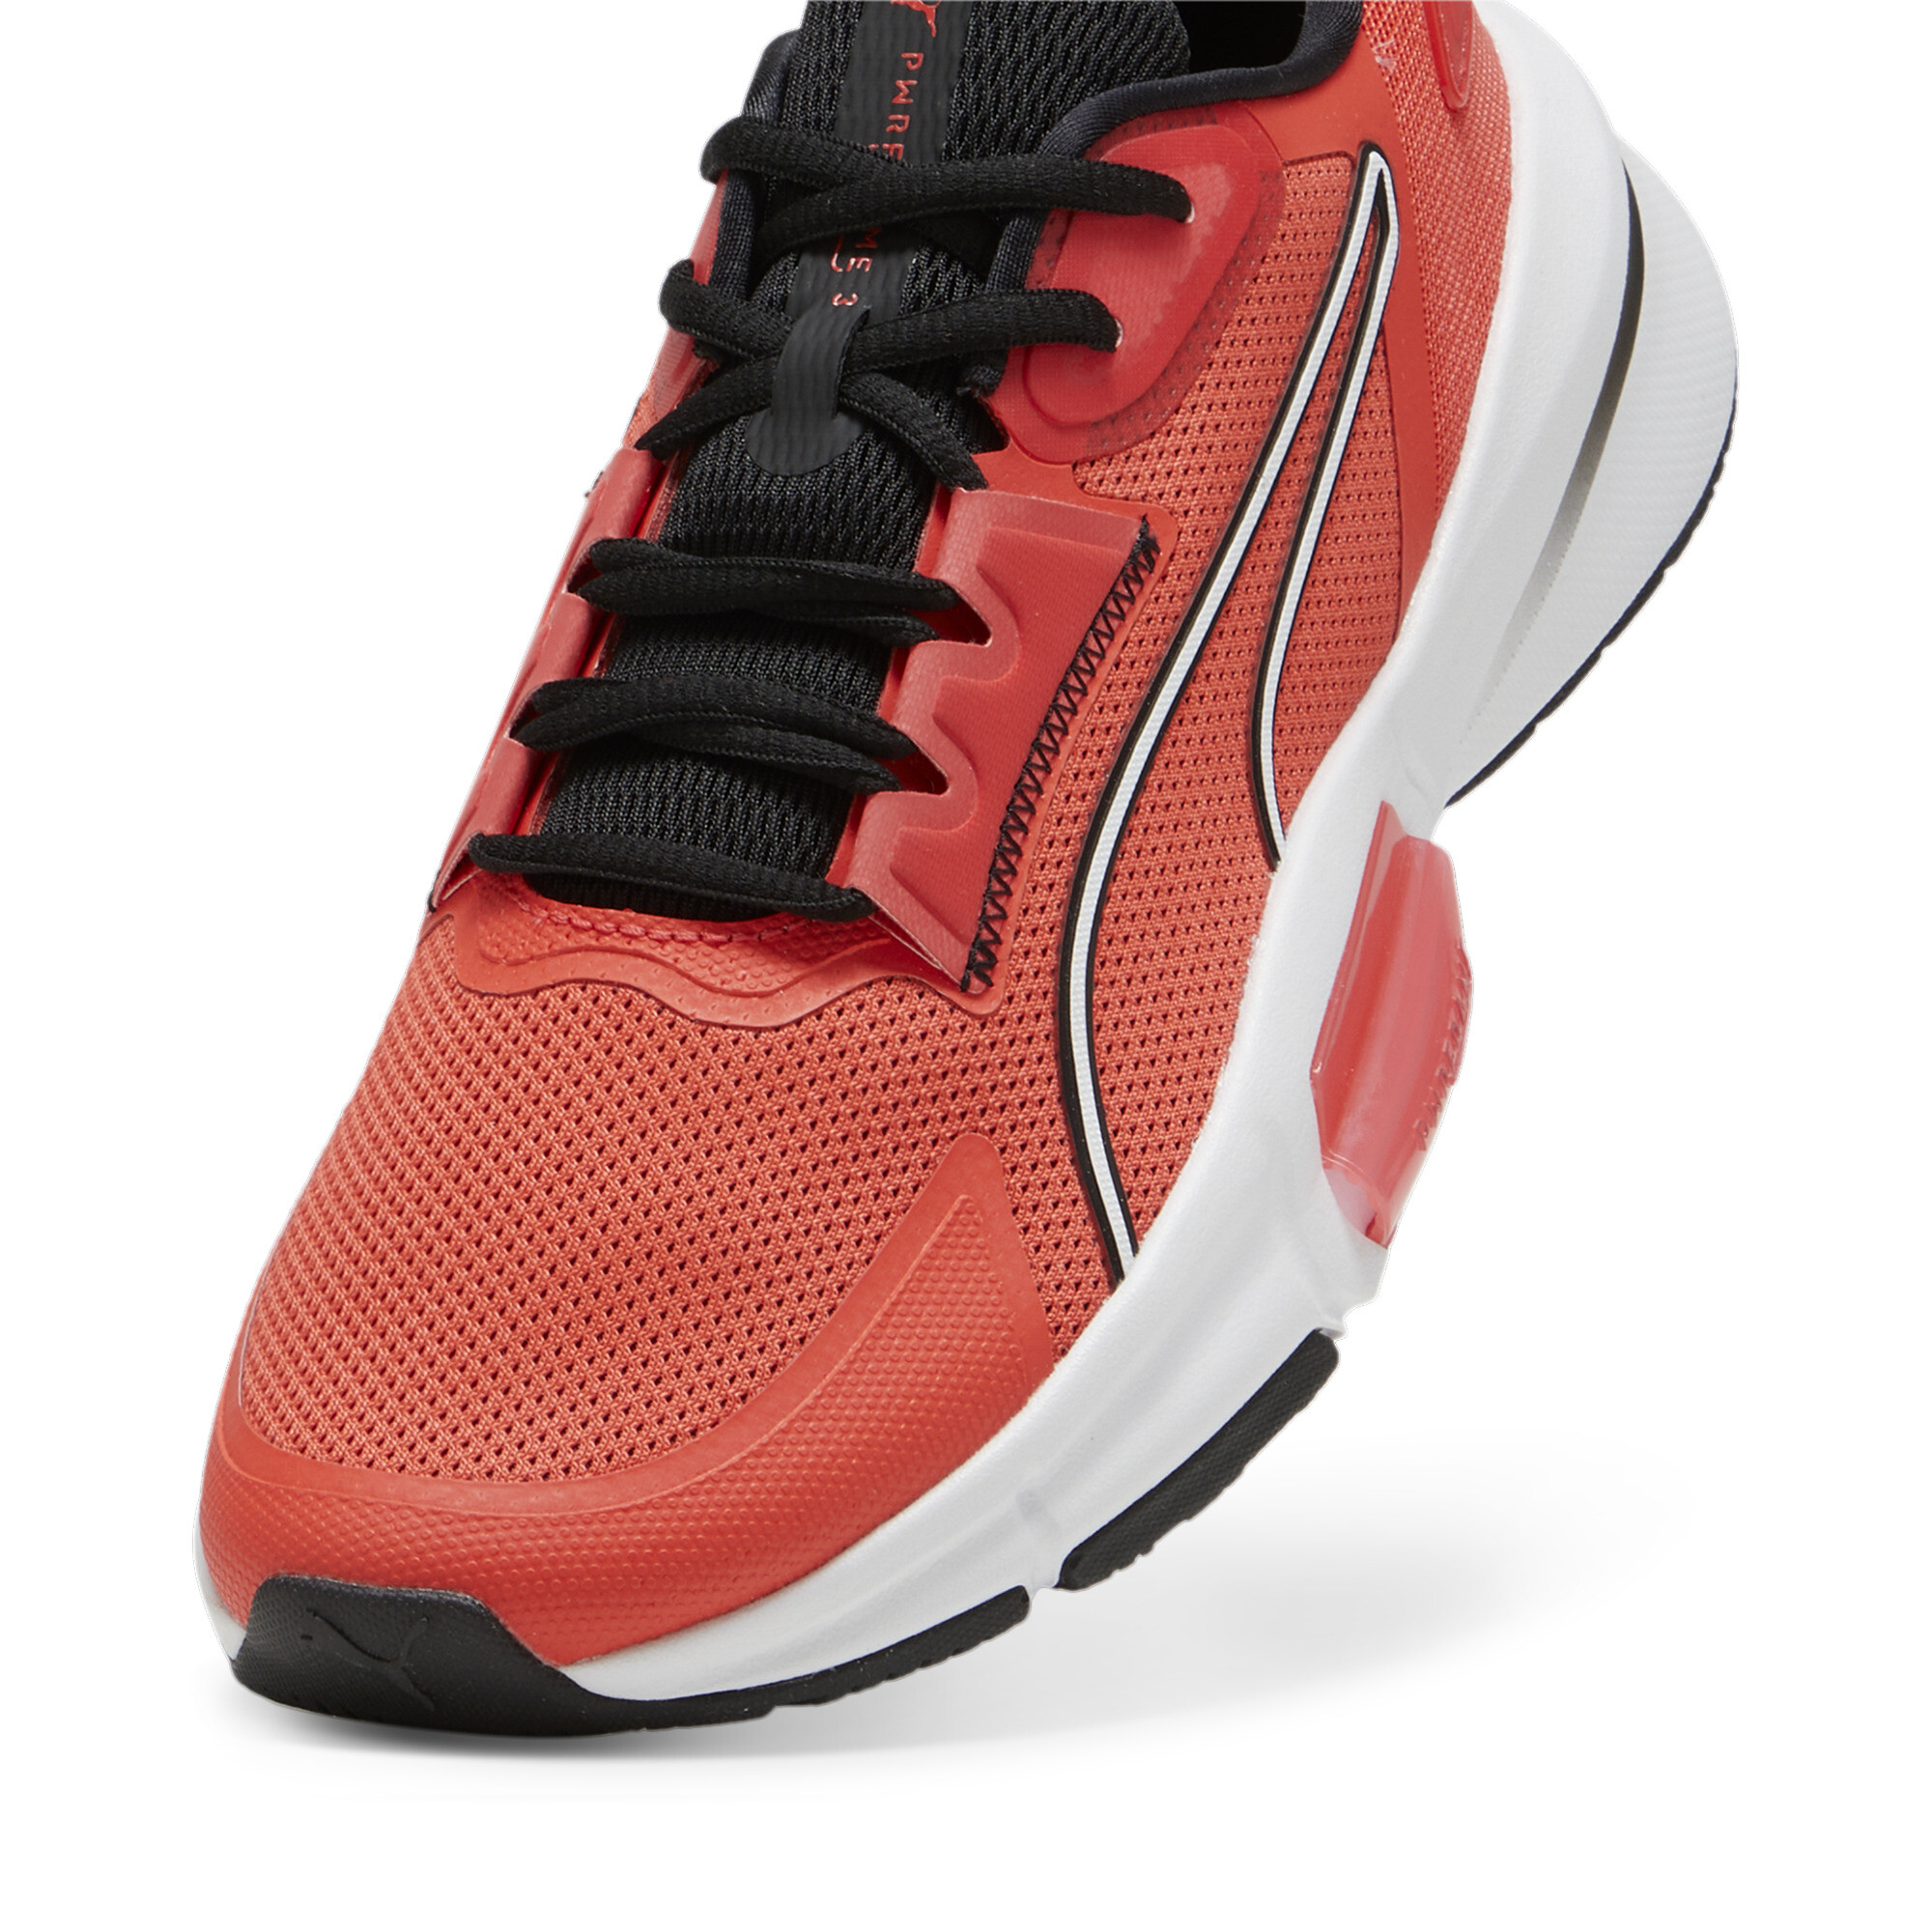 Men's PUMA PWRFrame TR 3 Training Shoes In Red, Size EU 48.5